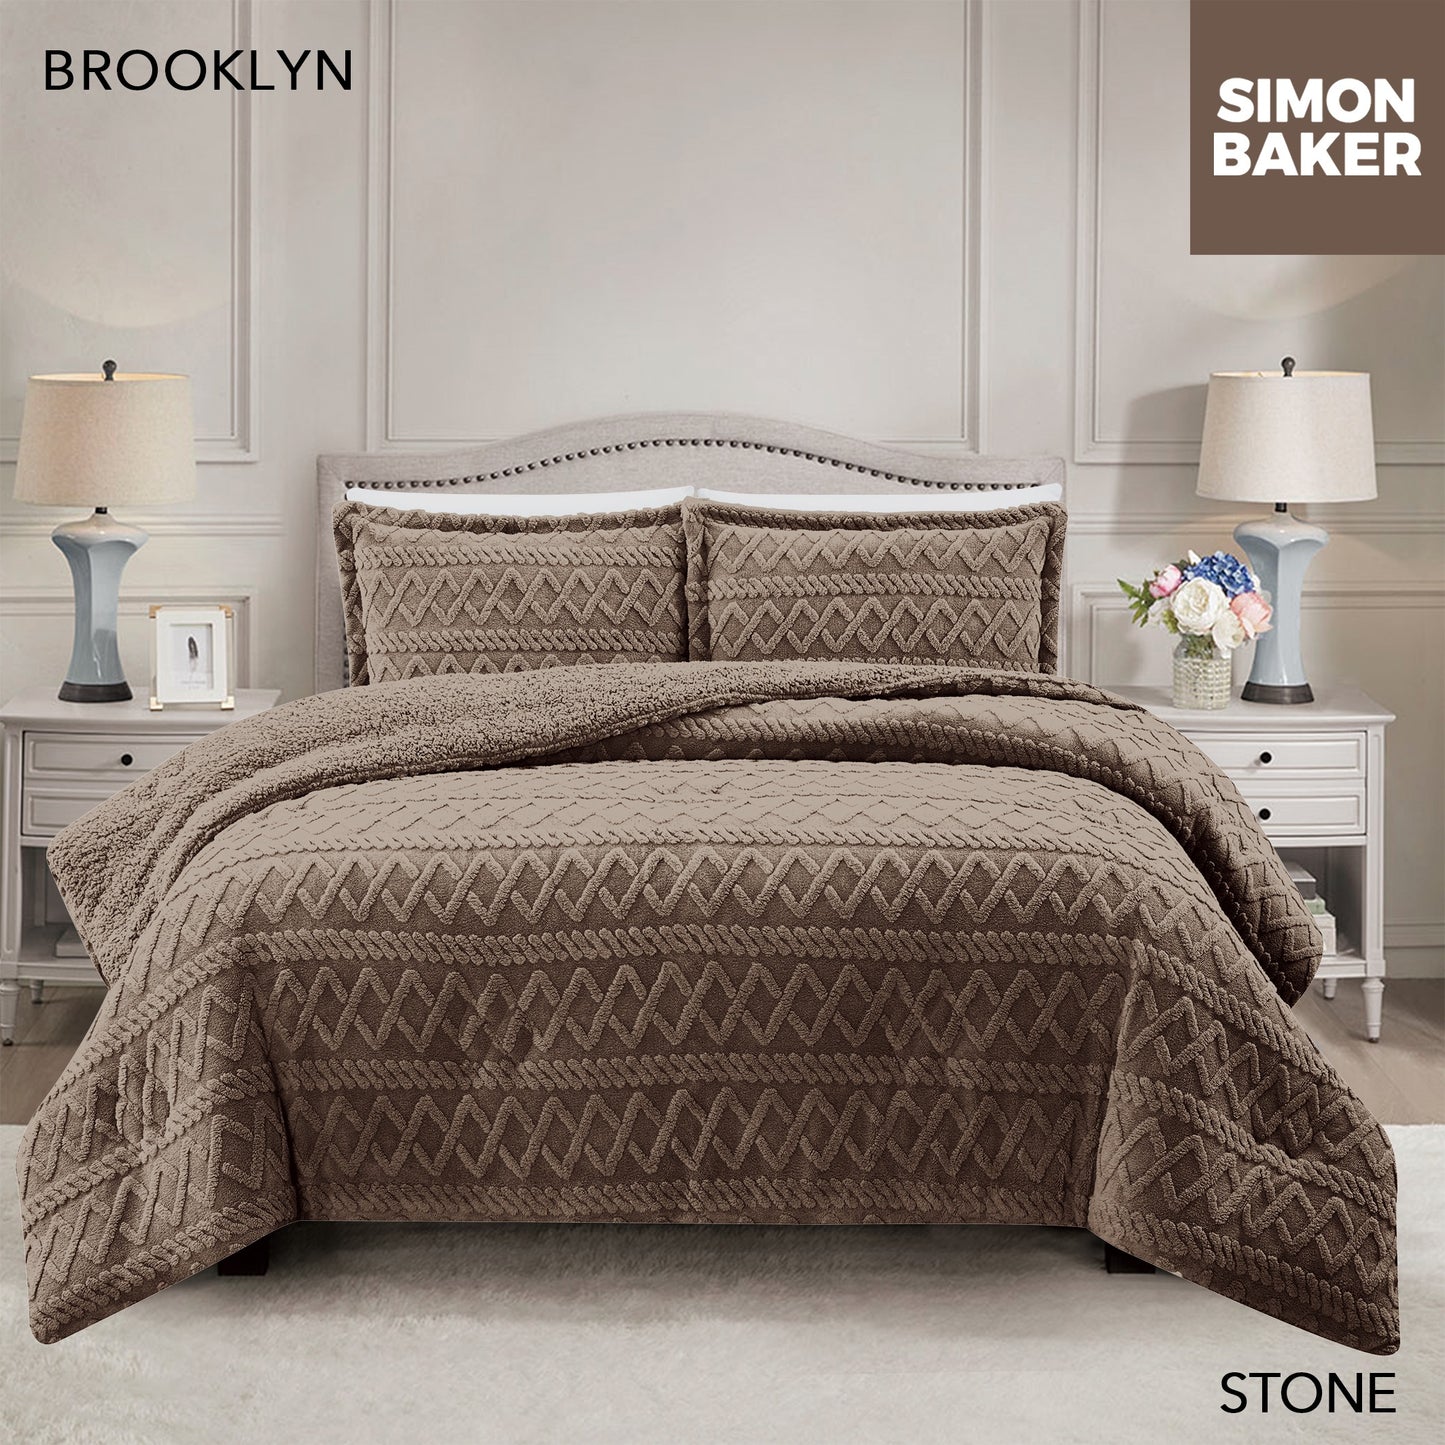 Brooklyn Comforter Set with Sherpa